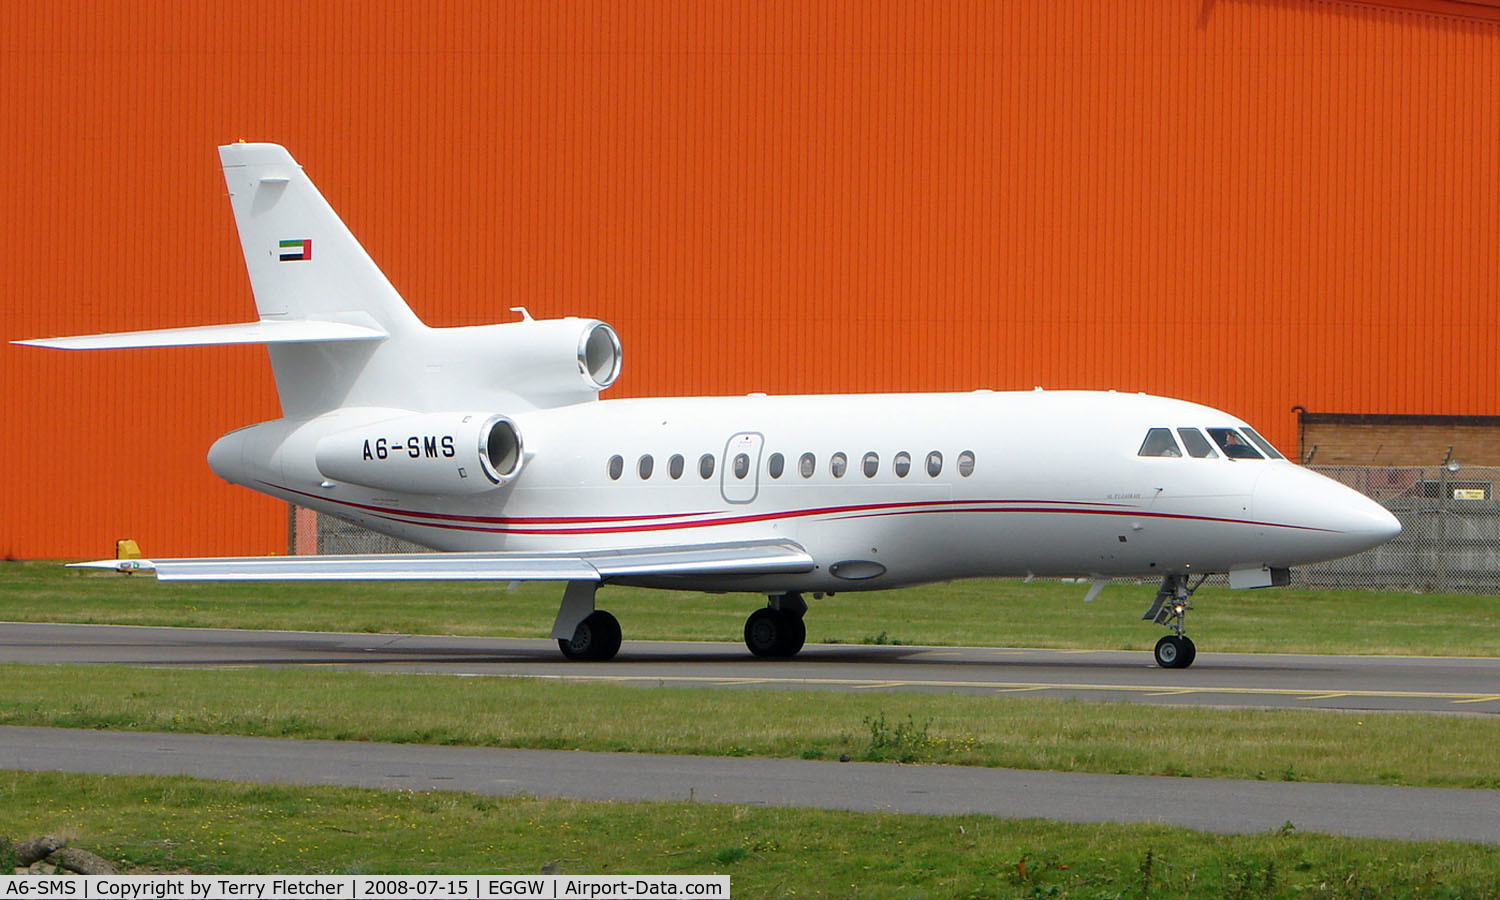 A6-SMS, 2007 Dassault 900DX C/N 616, This registration has now been re-used on a Falcon 900DX  msn 616